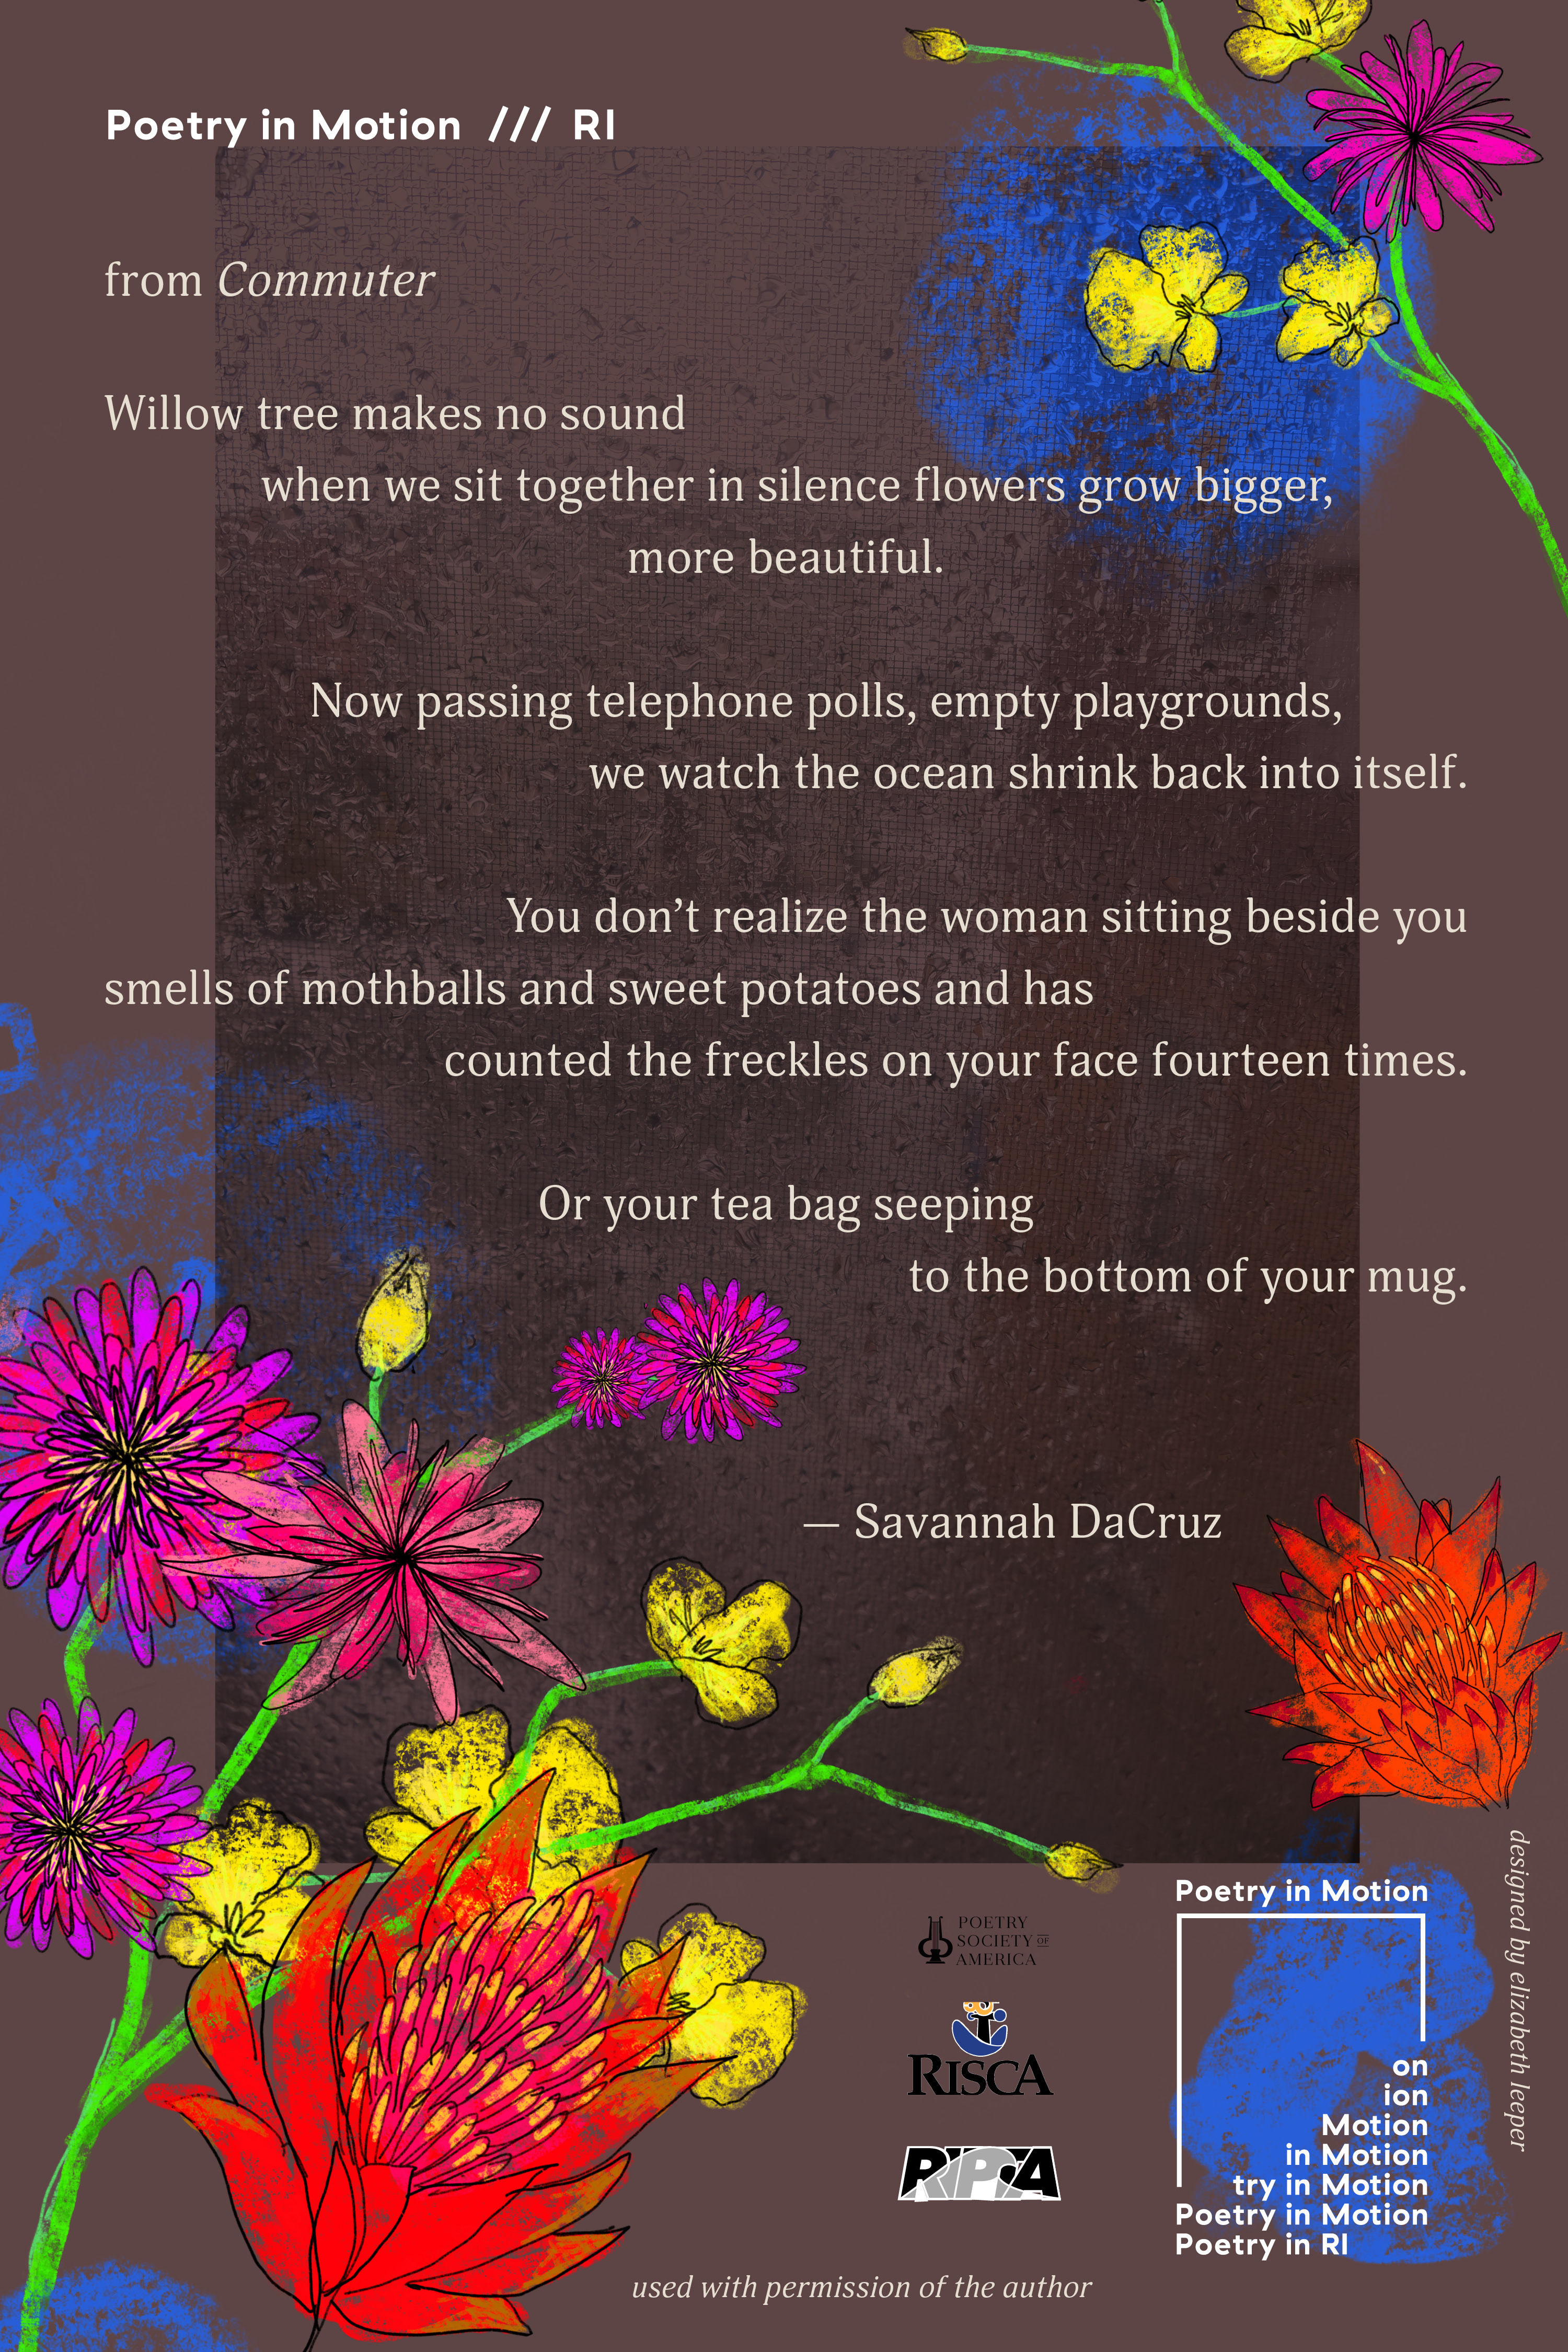 A brown poster with bursts of colorful flowers features an excerpt from the poem, Commuter by Savannah DaCruz.